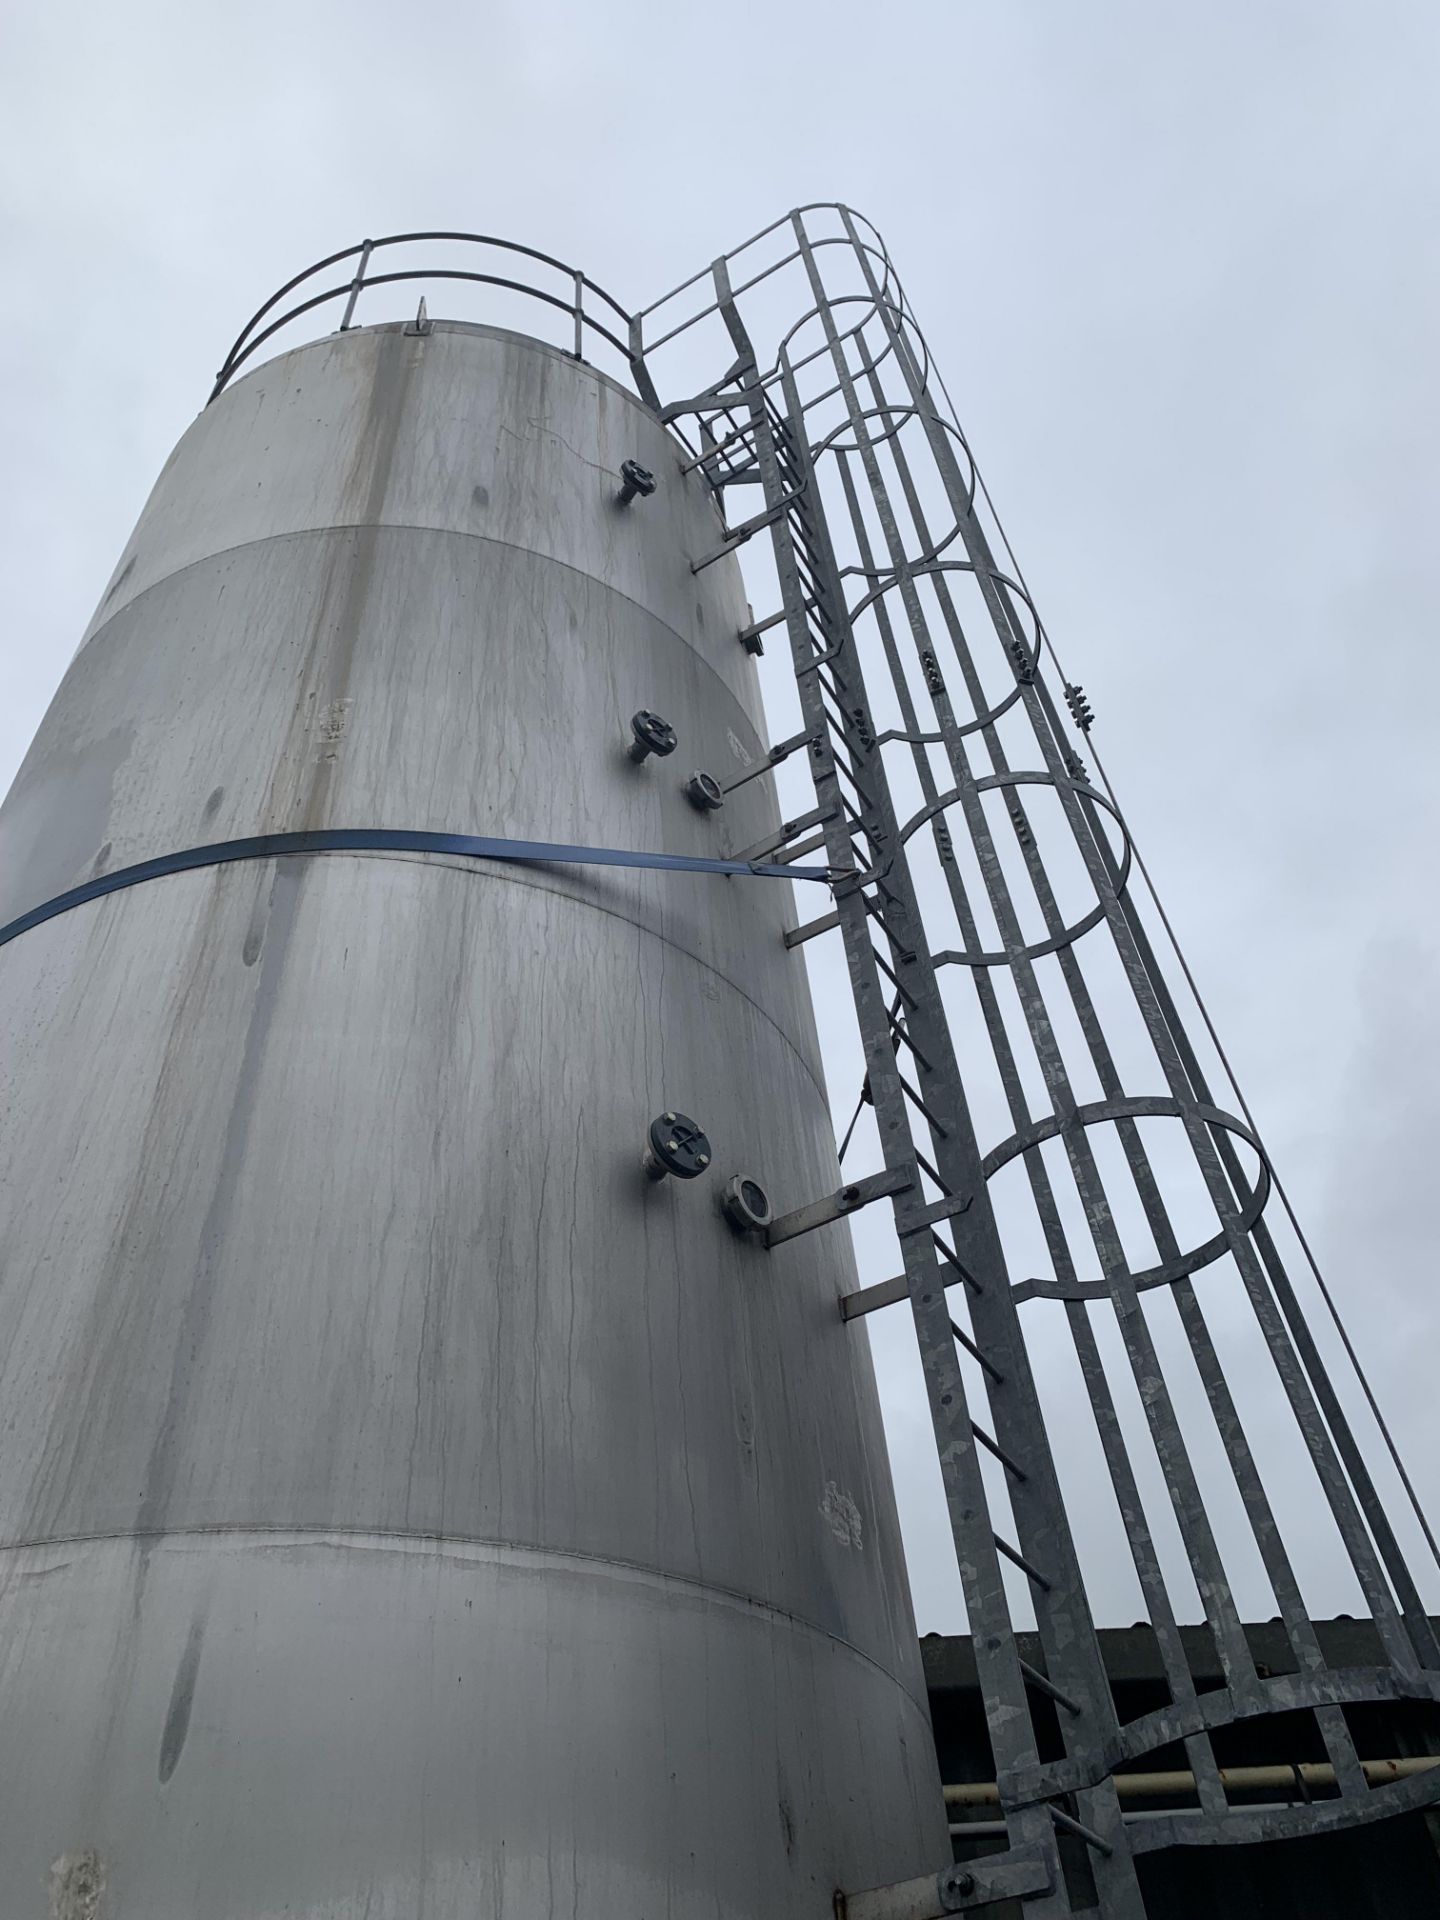 59,000 Litres 1298 Gallon Vertical Stainless Steel 304 Storage Tank with supports & access ladder - Image 6 of 7